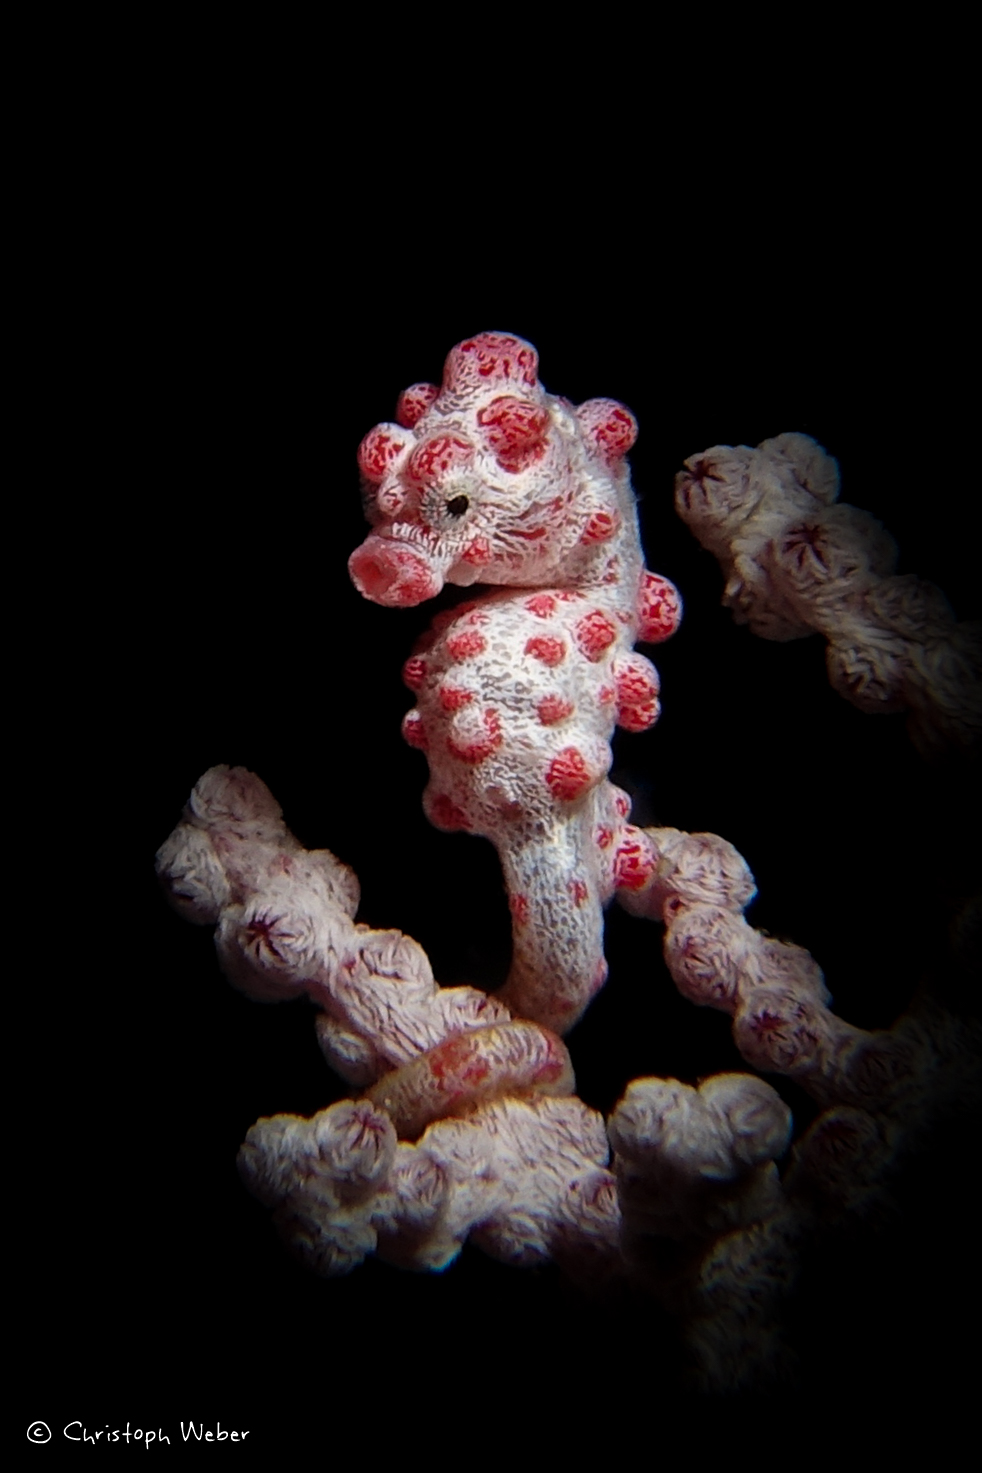 Compact cameras for Underwater Photography, Pigmy Seahorse, Christoph Weber